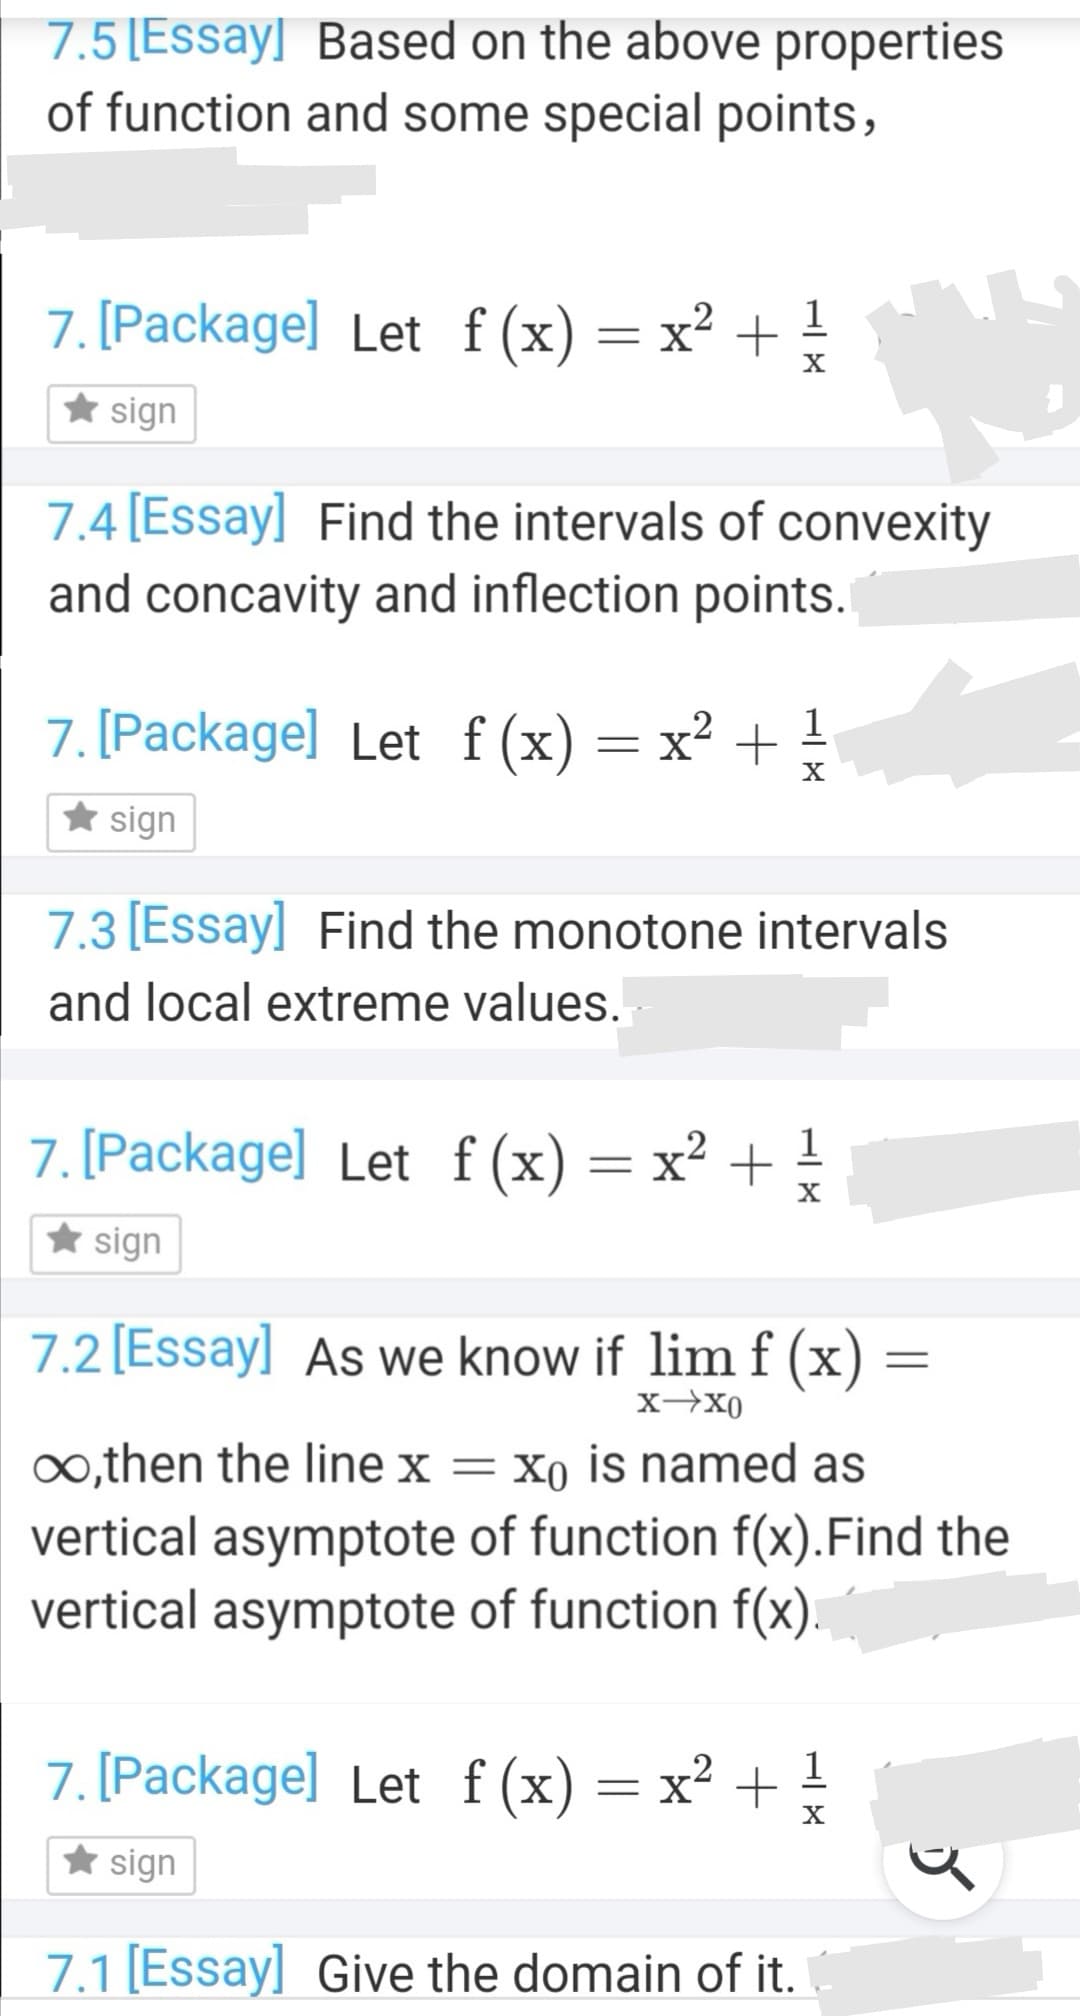 7.3 [Essay] Find the monotone intervals
and local extreme values.
7. [Package] Let f(x)=x² + !
* sign
7.2 [Essay] As we know if lim f (x)
x-x0
∞,then the linex = x0 is named as
vertical asymptote of function f(x).Find the
vertical asymptote of function f(x).
7. [Package] Let f(x)= x² +
1
X
* sign
7.1 [Essay] Give the domain of it.
